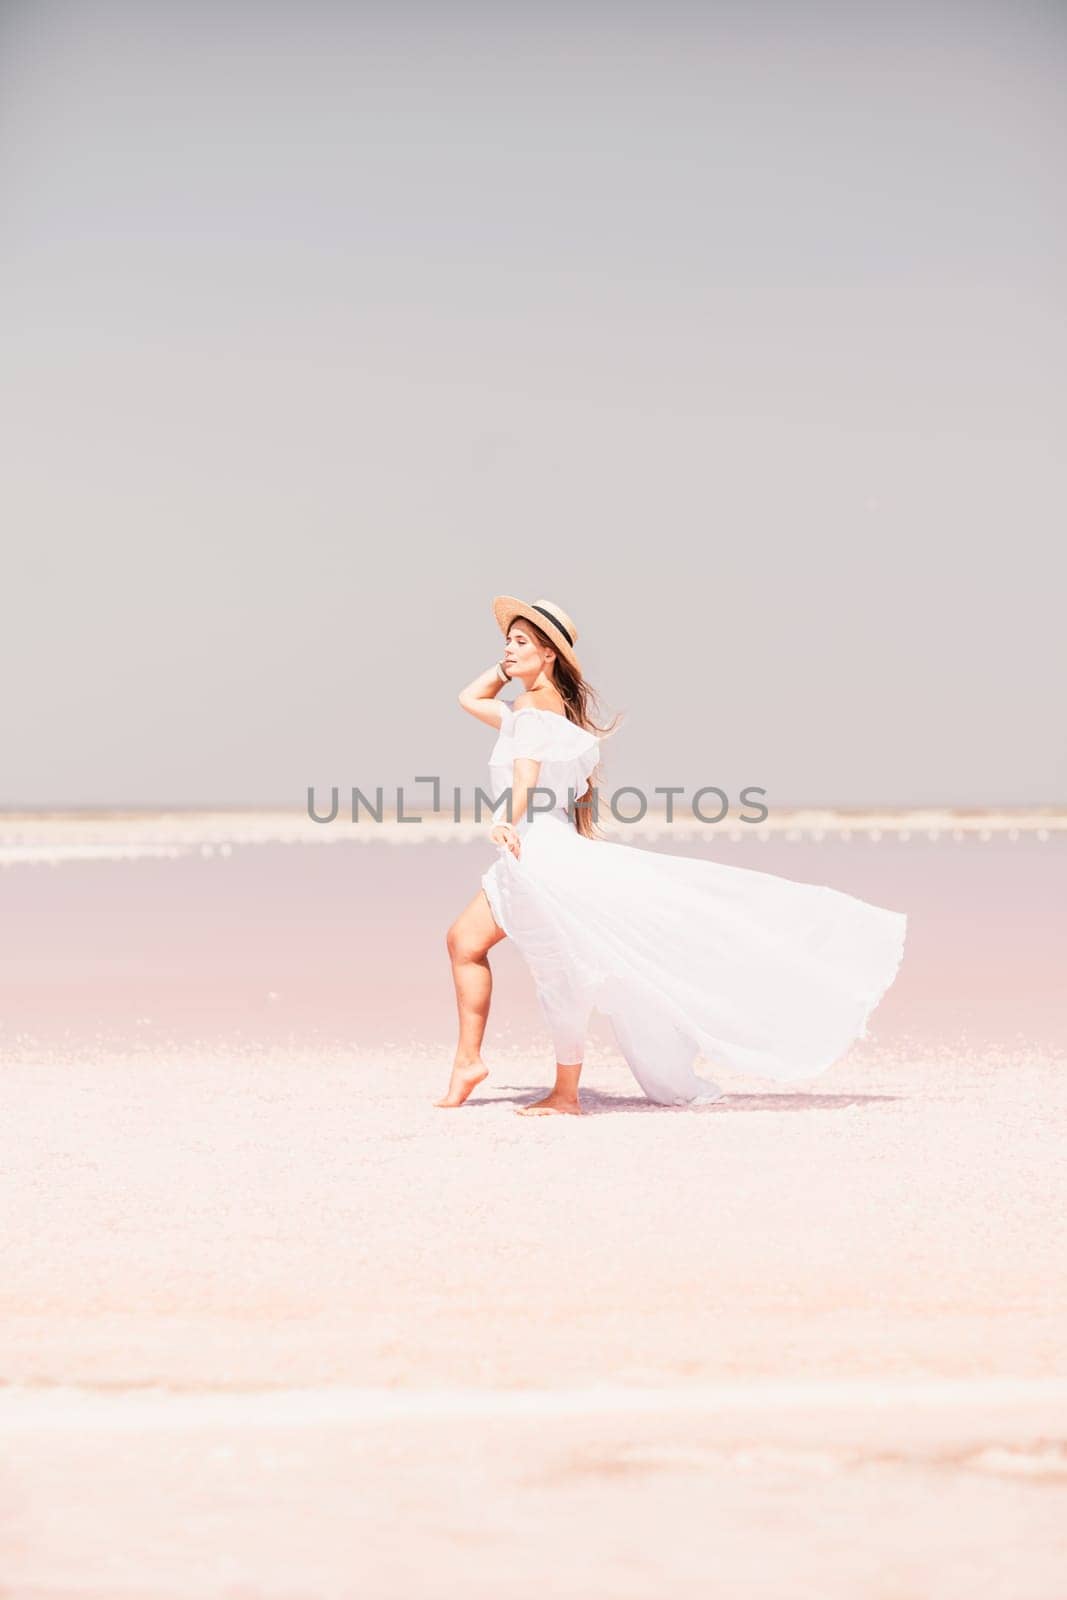 Woman in pink salt lake. She walks in a white long dress and hat along the salty white shore of the lake. Wanderlust photo for memory.